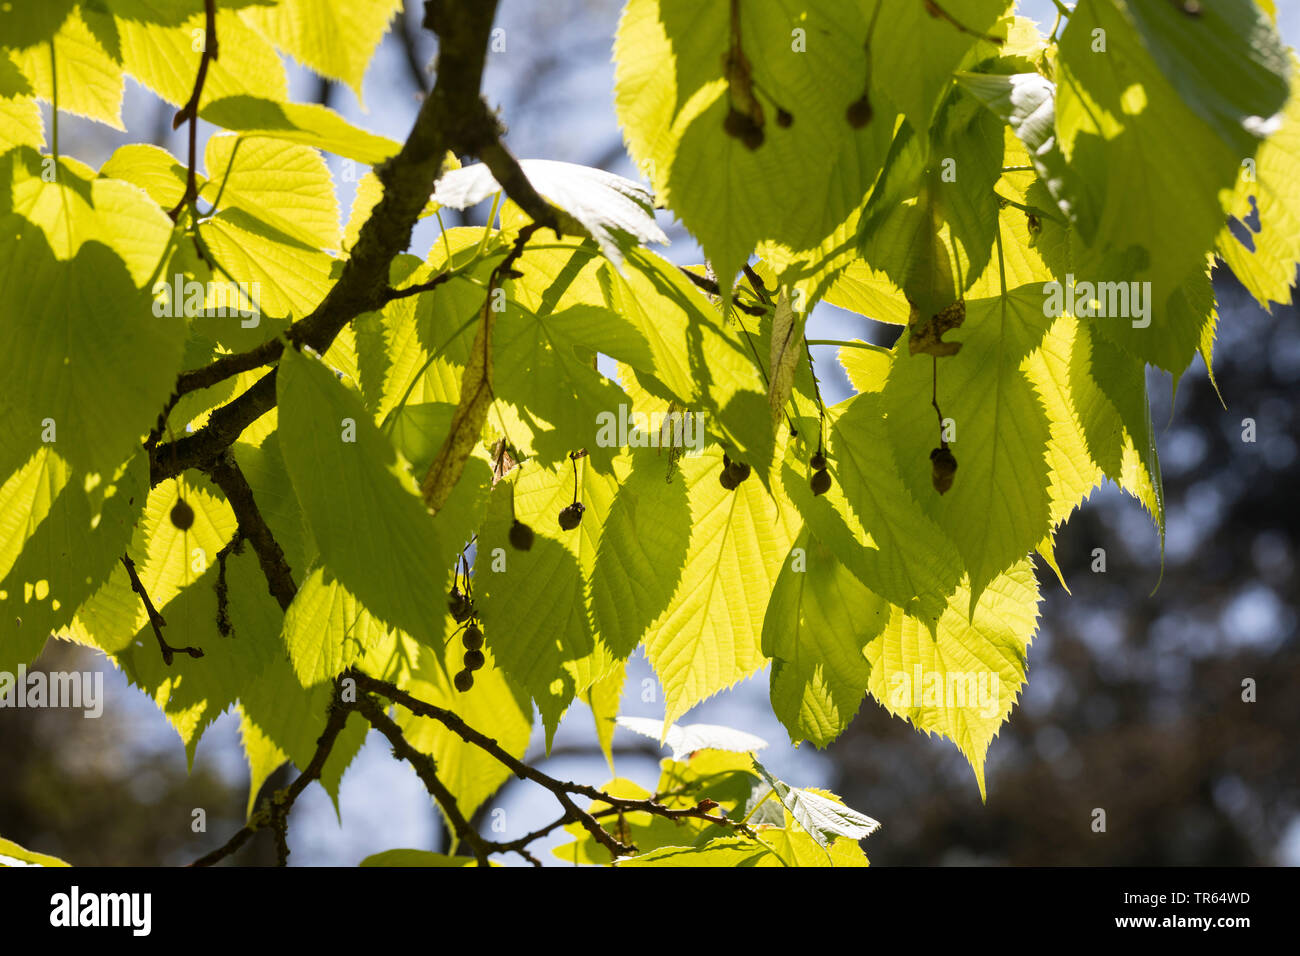 Caucasian Lime, Caucasian Linden, Bigleaf Linden, Bigleaf Lime (Tilia dasystyla, Tilia caucasica), branch with fruits in backlight Stock Photo